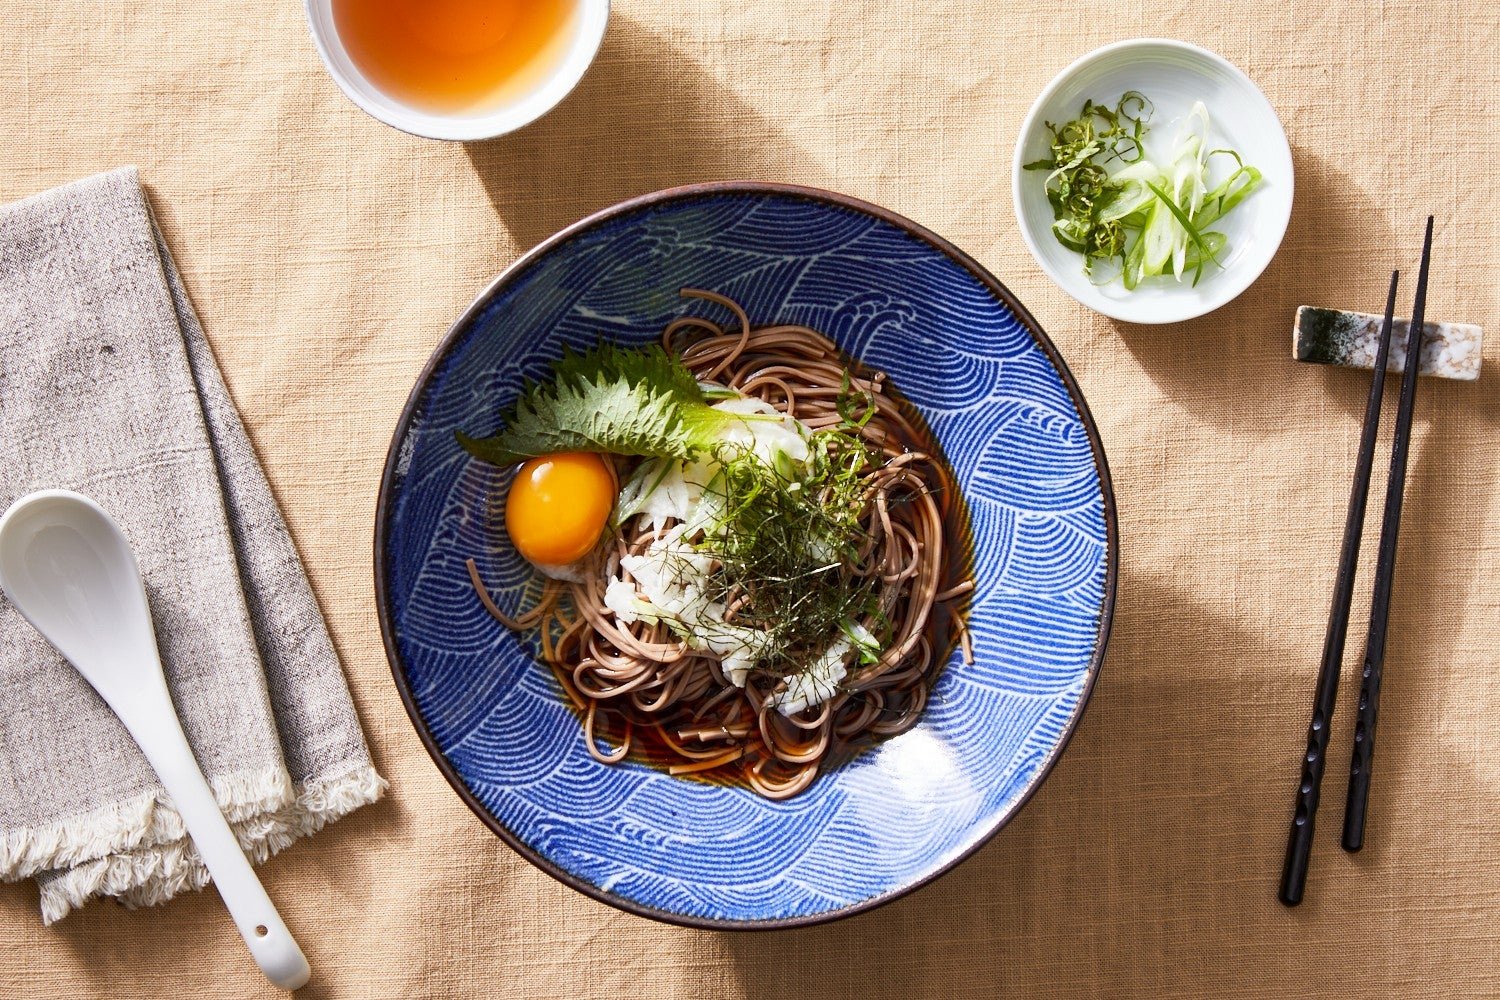 A bowl of soba noodles with an egg yolk.